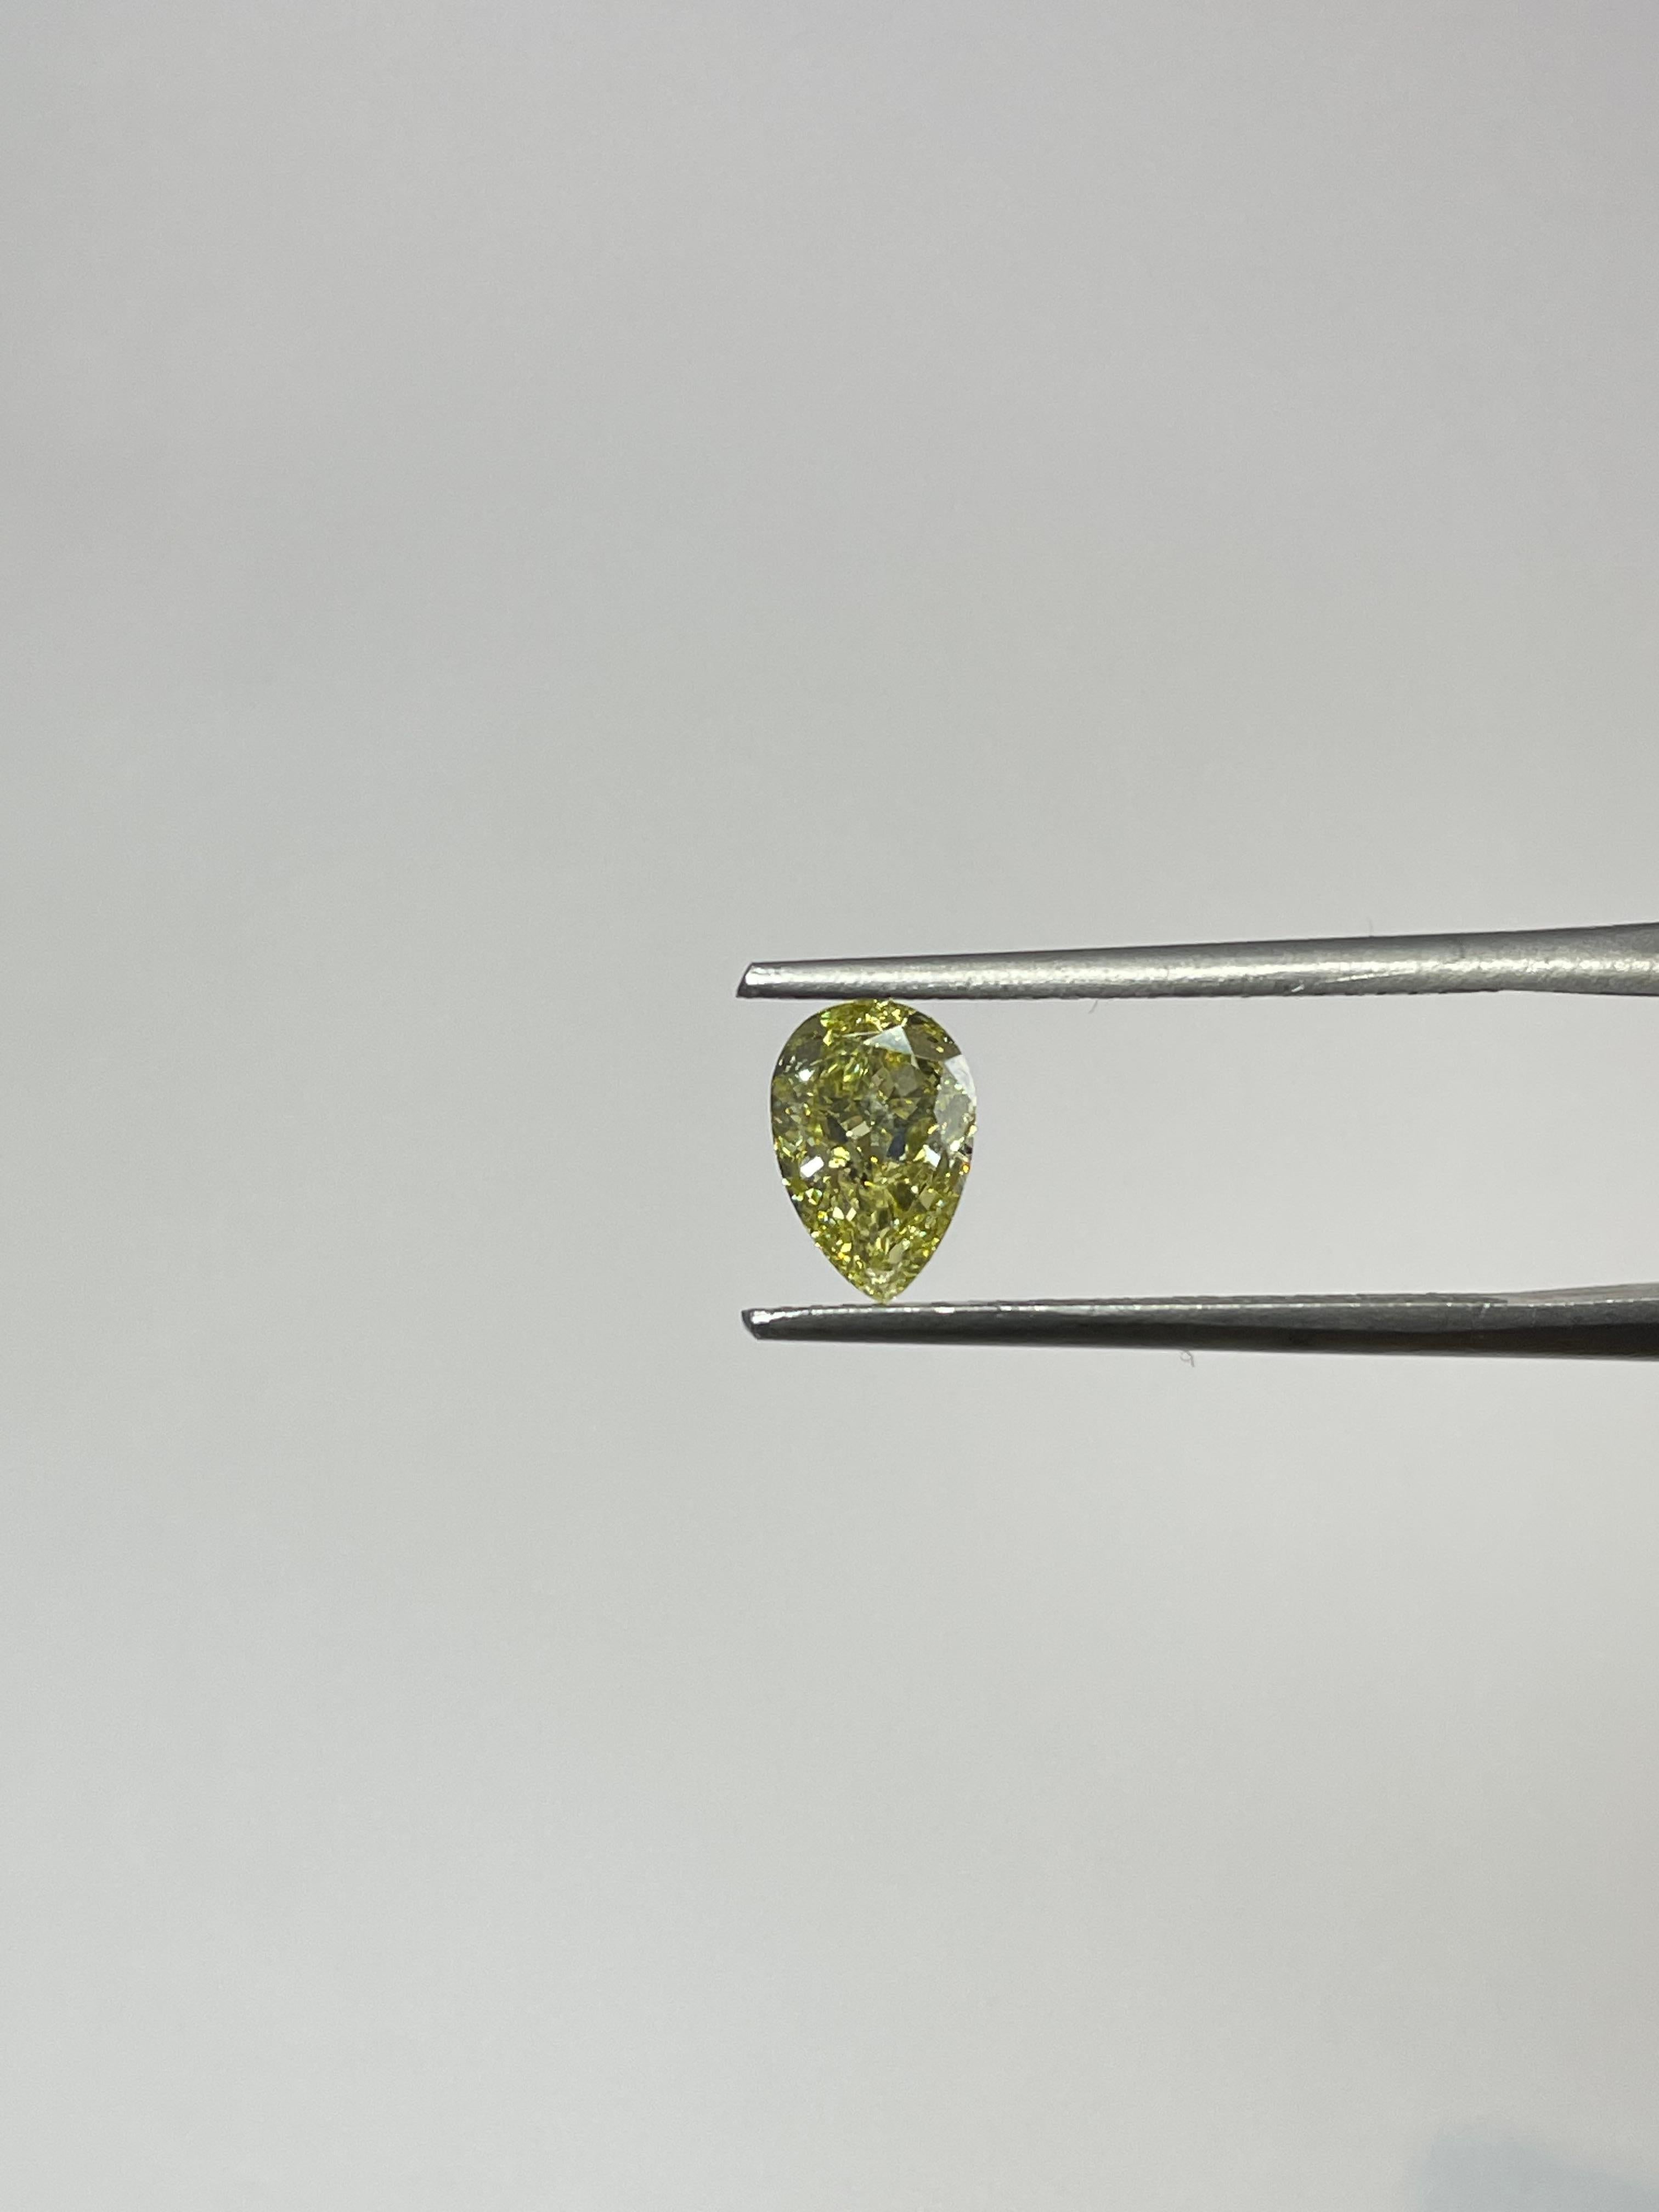 Brilliant Cut GIA Certified 1.00 Carat Pear Brilliant Fancy Yellow SI2 Natural Diamond For Sale